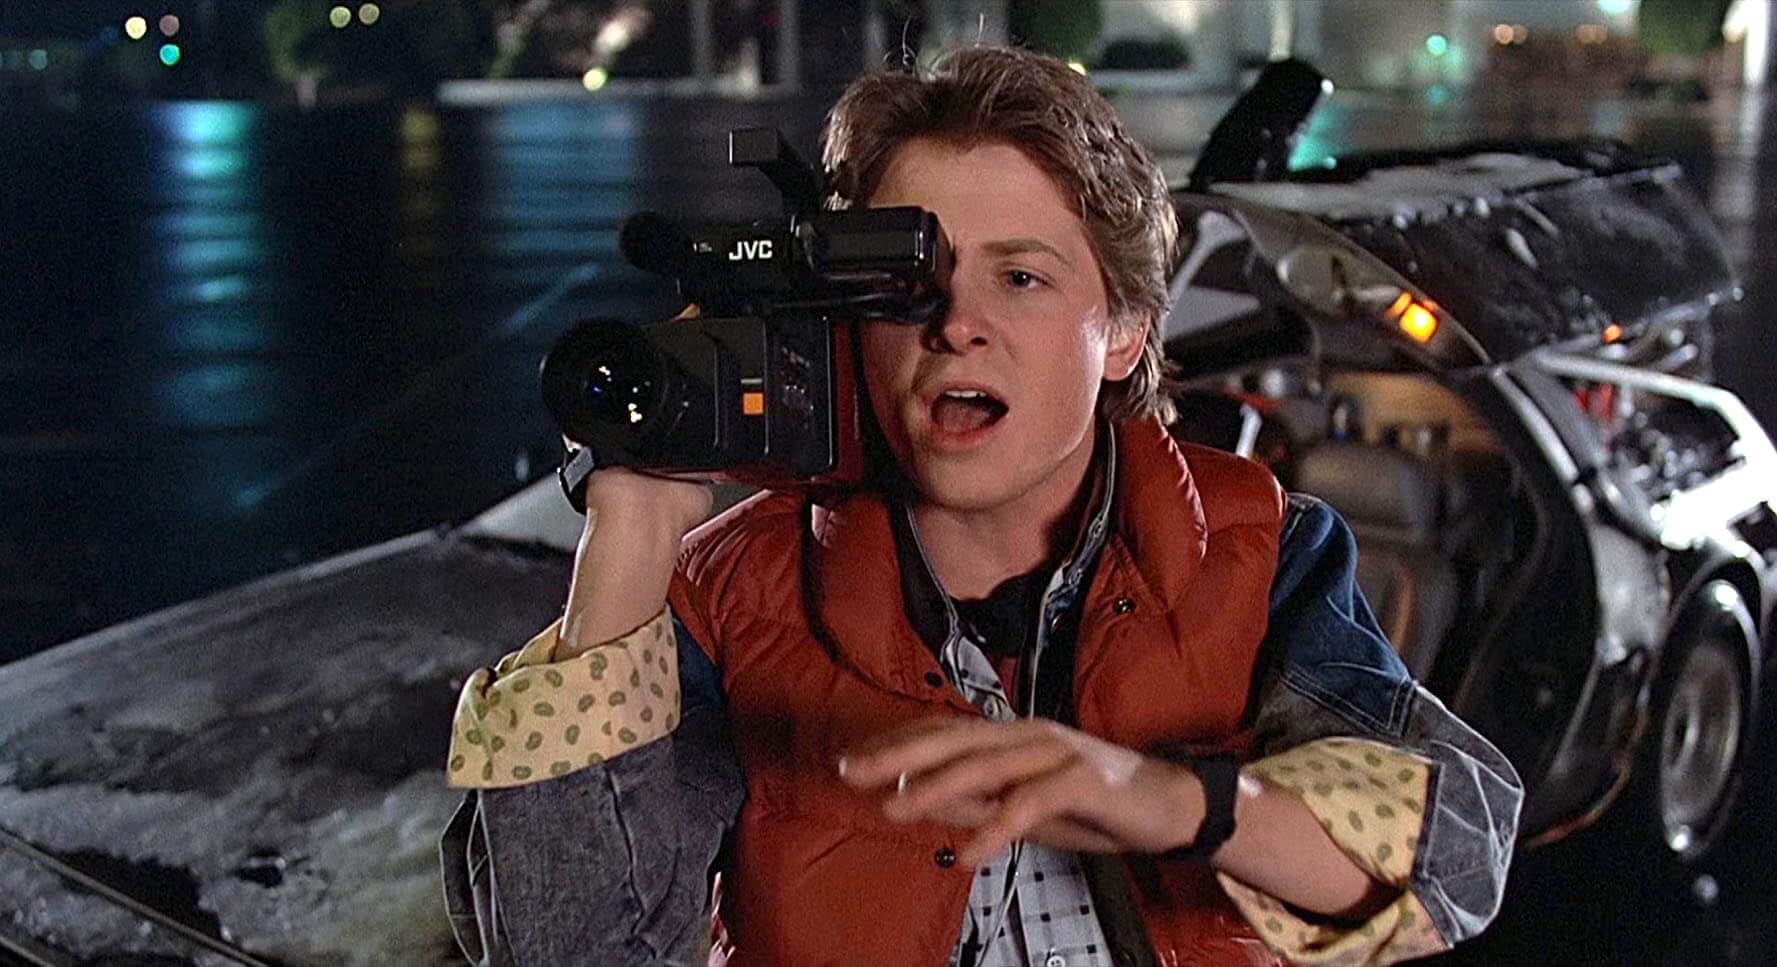 Michael J. Fox in the Back to the Future franchise